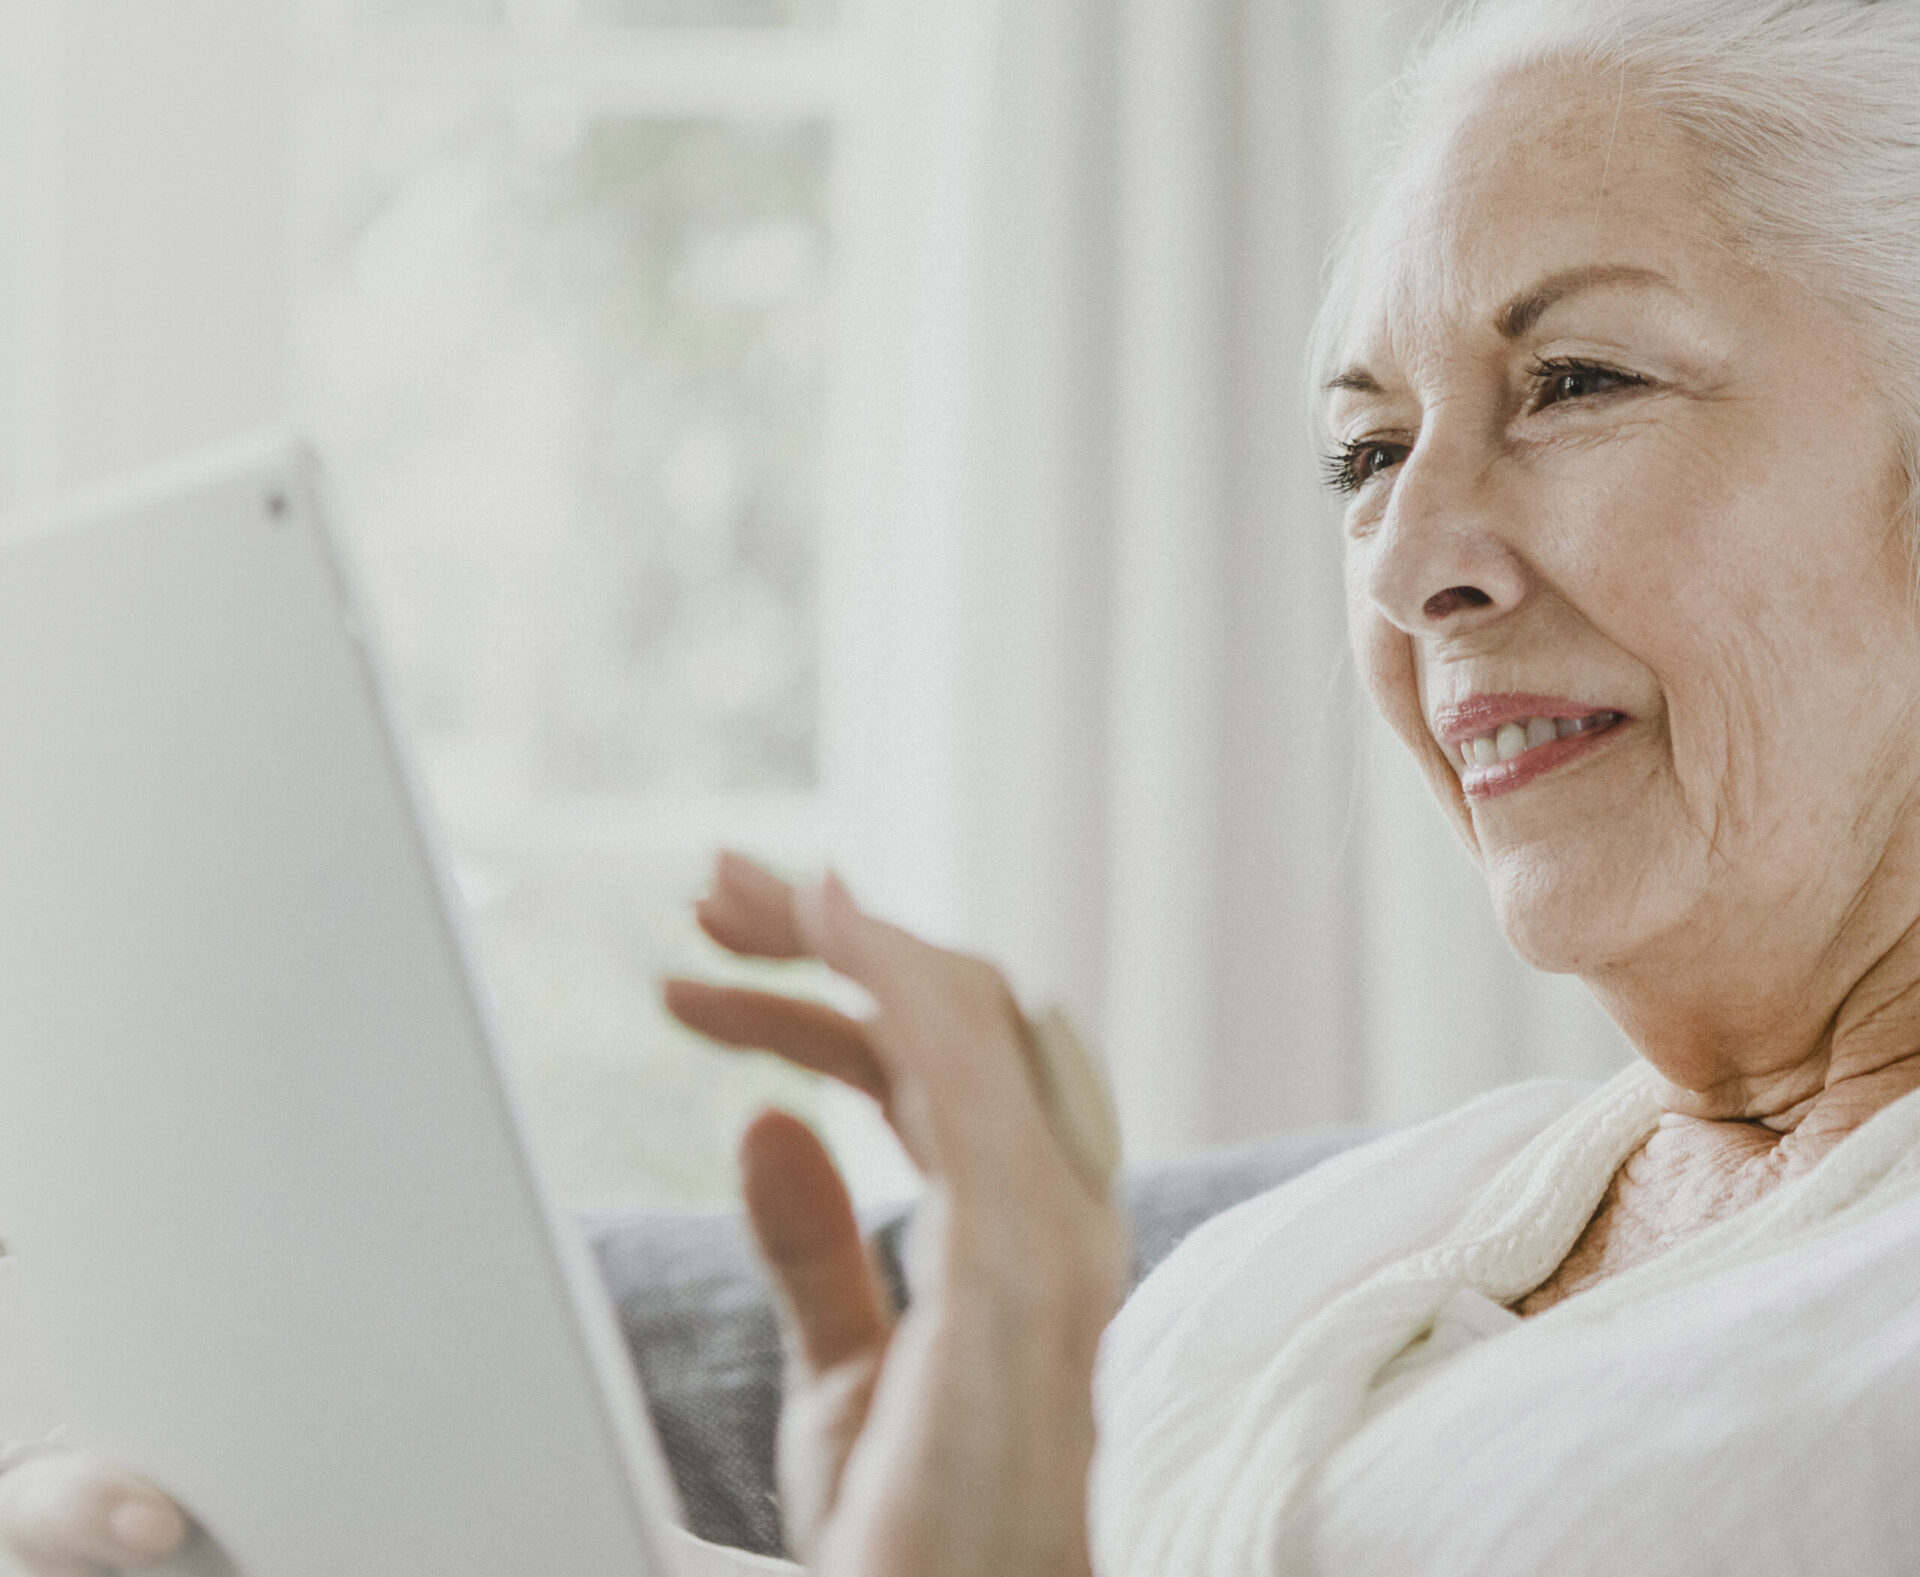 An older lady uses a laptop while smiling